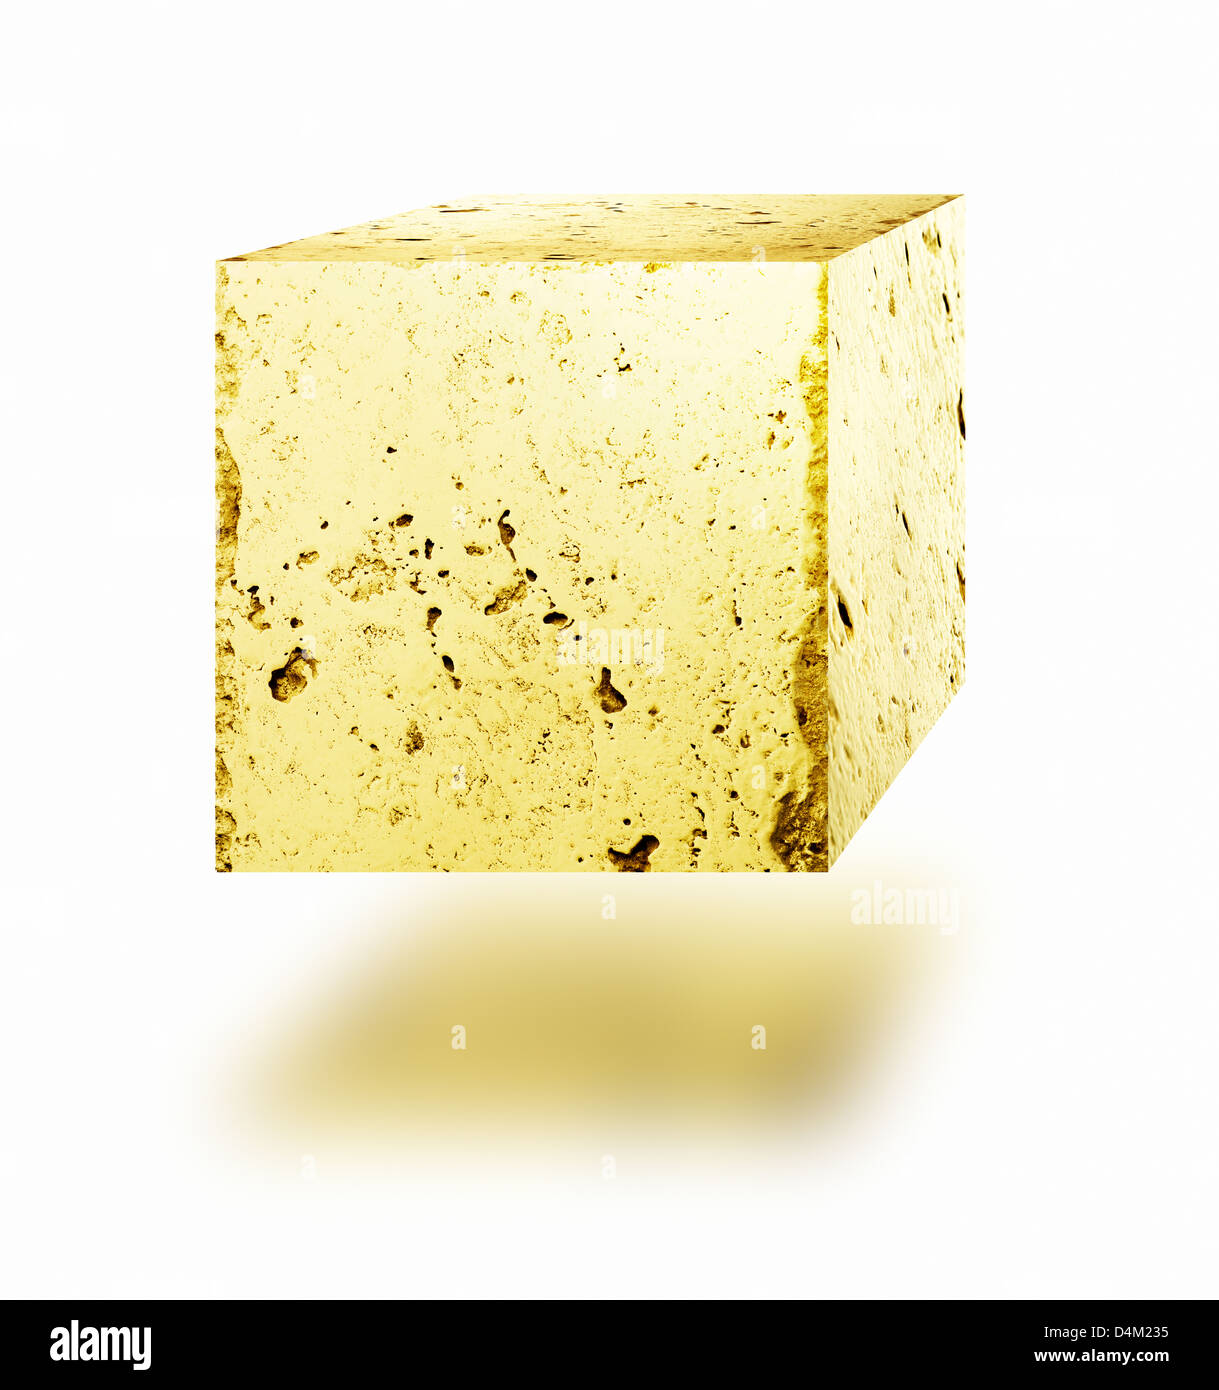 Gold nugget cube floating against white background. Stock Photo